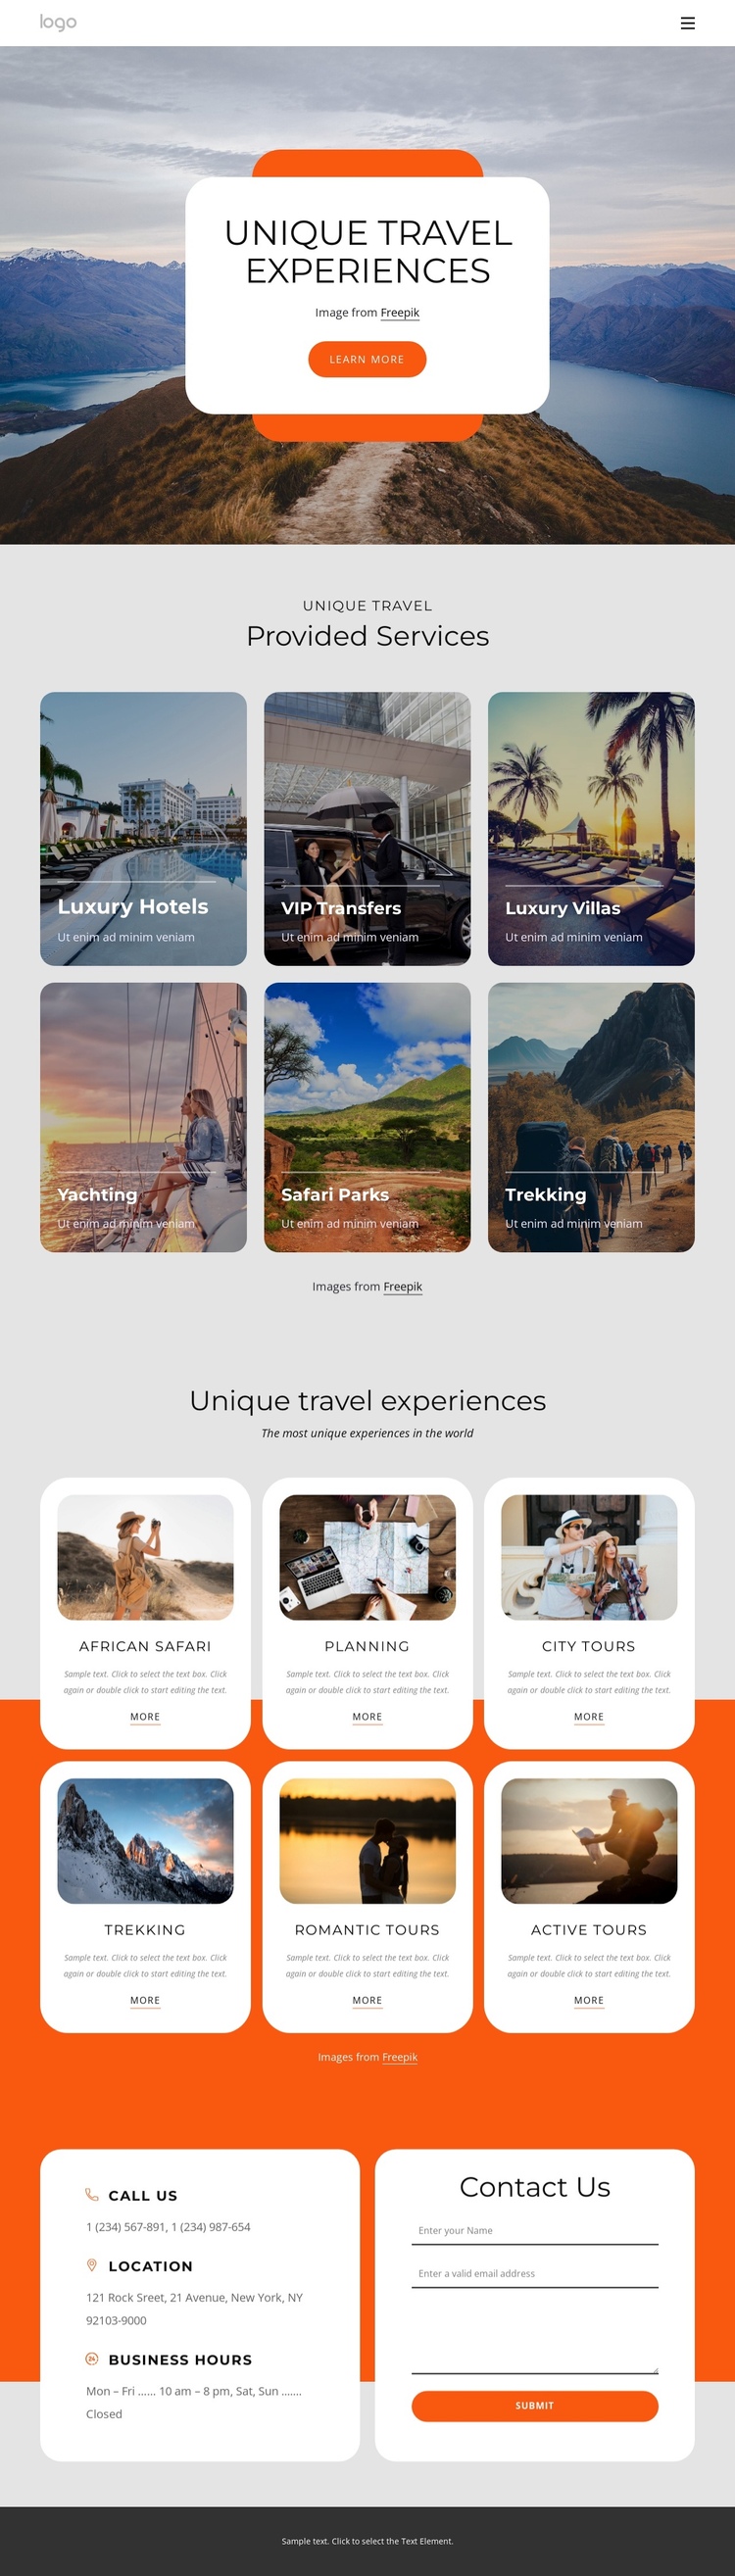 Luxury small-group travel experience Website Builder Software